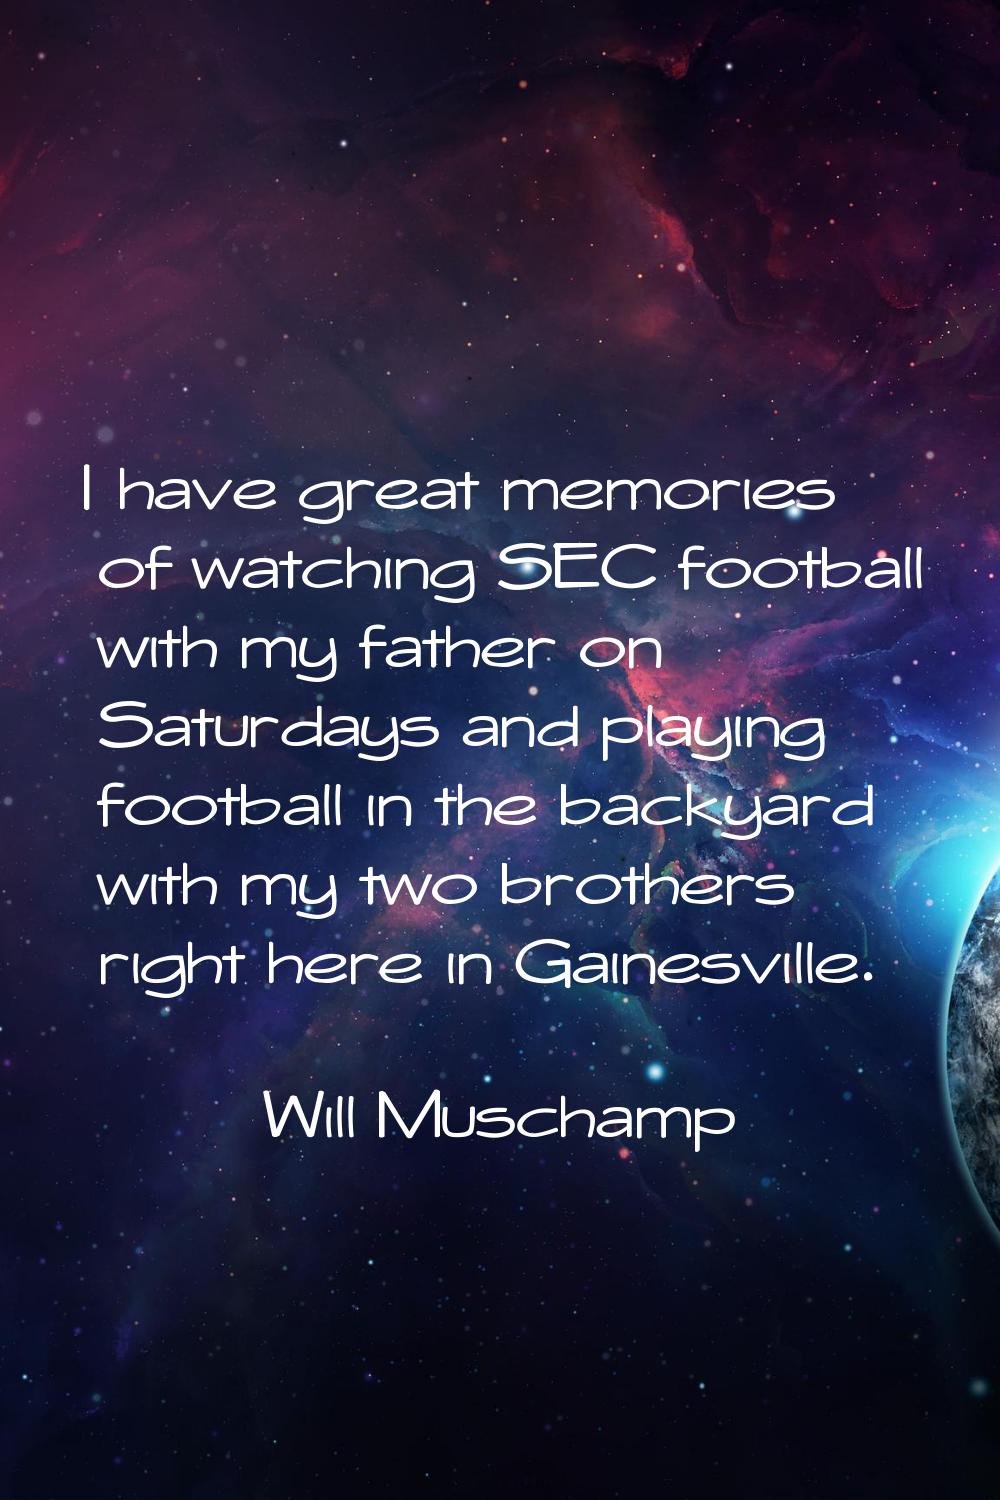 I have great memories of watching SEC football with my father on Saturdays and playing football in 